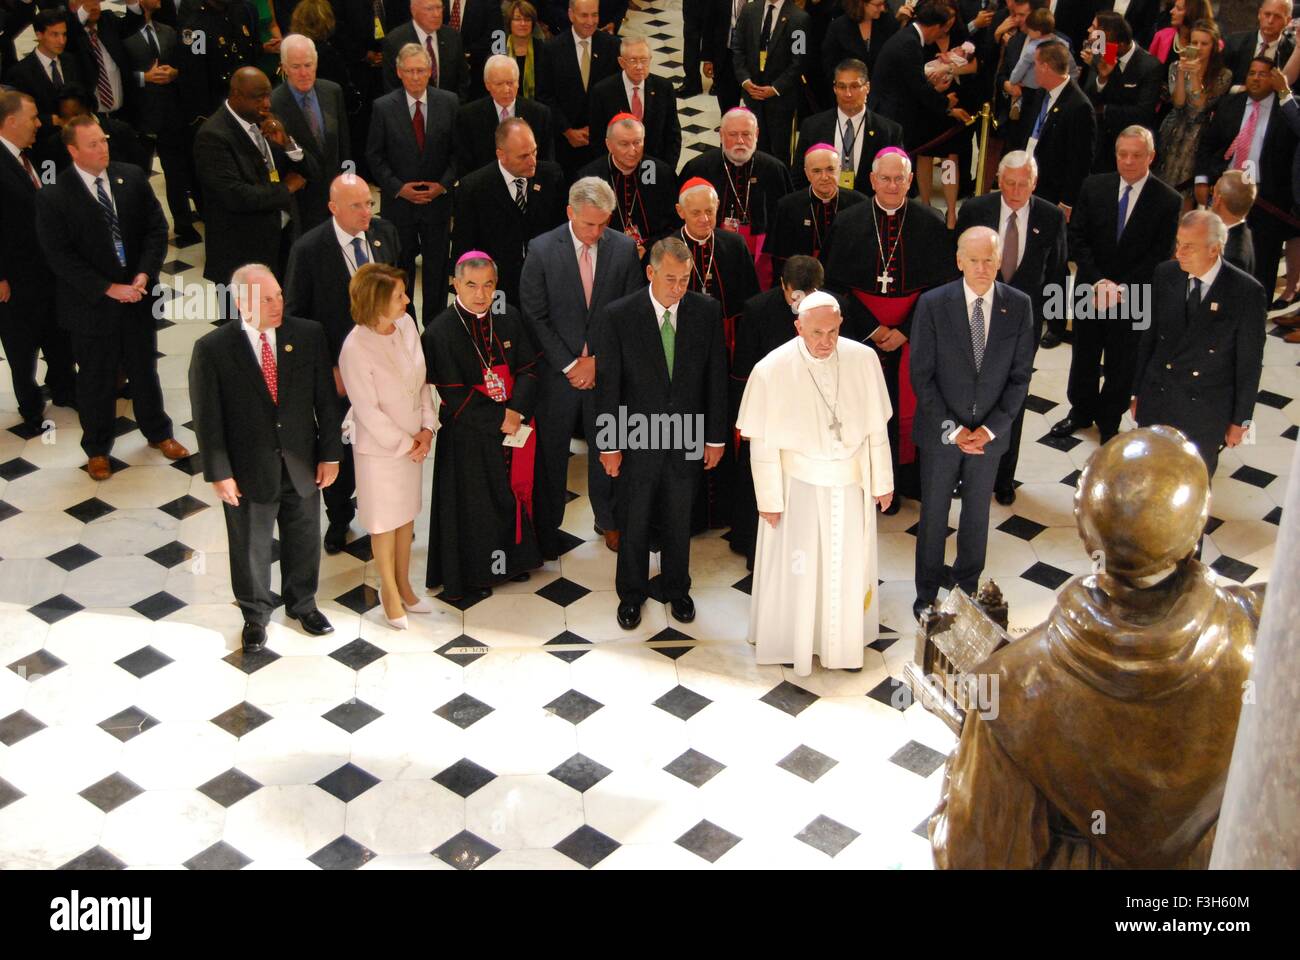 Pope Francis along with members of Congress and Vice President Joe Biden attend the blessing of the St. Junipero Serra statue during a visit to the United States Capitol September 24, 2015 in Washington, DC. Pope Francis is the first pontiff to address a joint meeting of Congress. Stock Photo